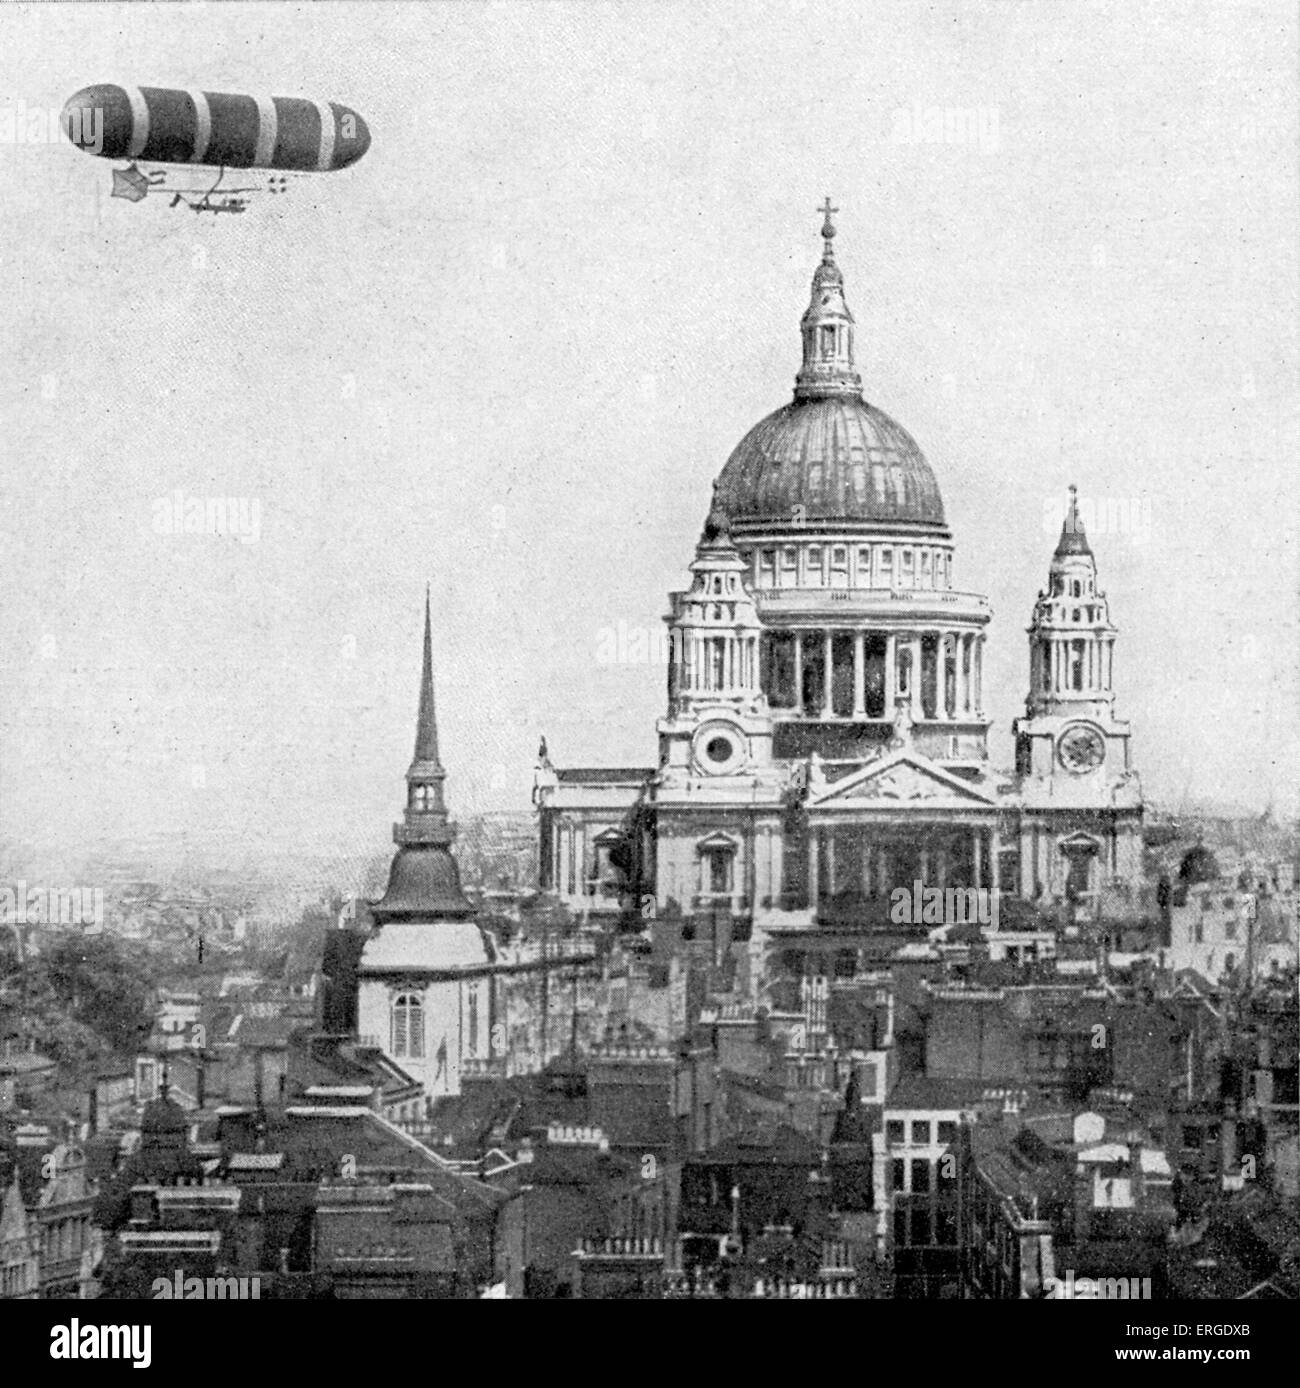 British military airship rounding St Paul's Cathedral, London, October 1907. Stock Photo